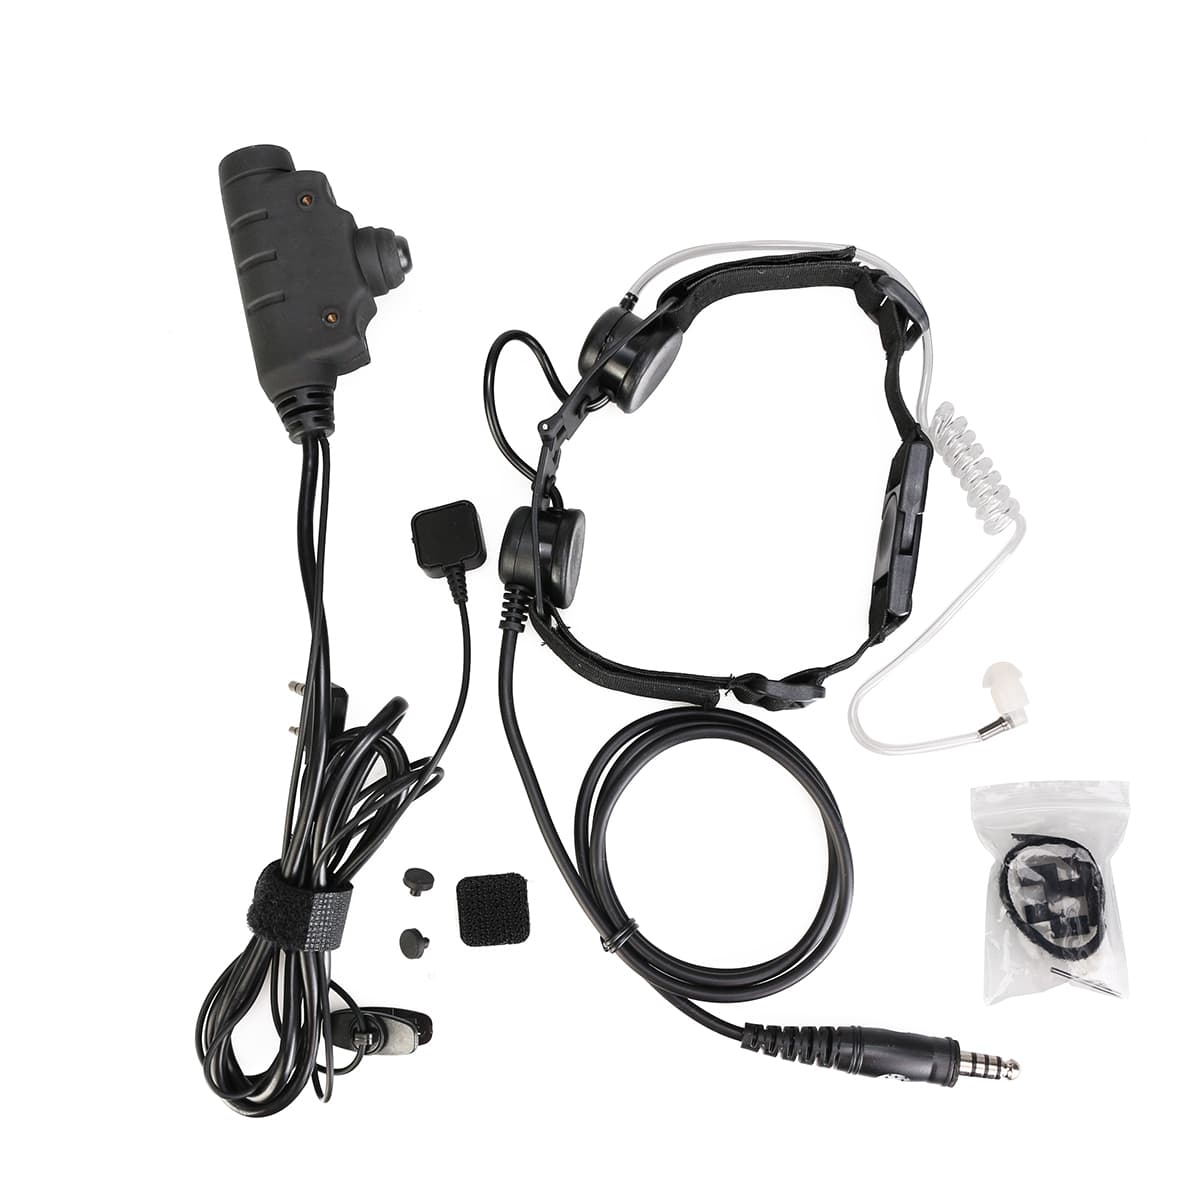 7.1mm Jack Plug Throat Mic Microphone Covert Acoustic Tube Cool U94 PTT Throat Microphone Earpiece Tactical Headset for Radio Walkie Talkie Vocal Hands-Free in-Ear Military Headset 